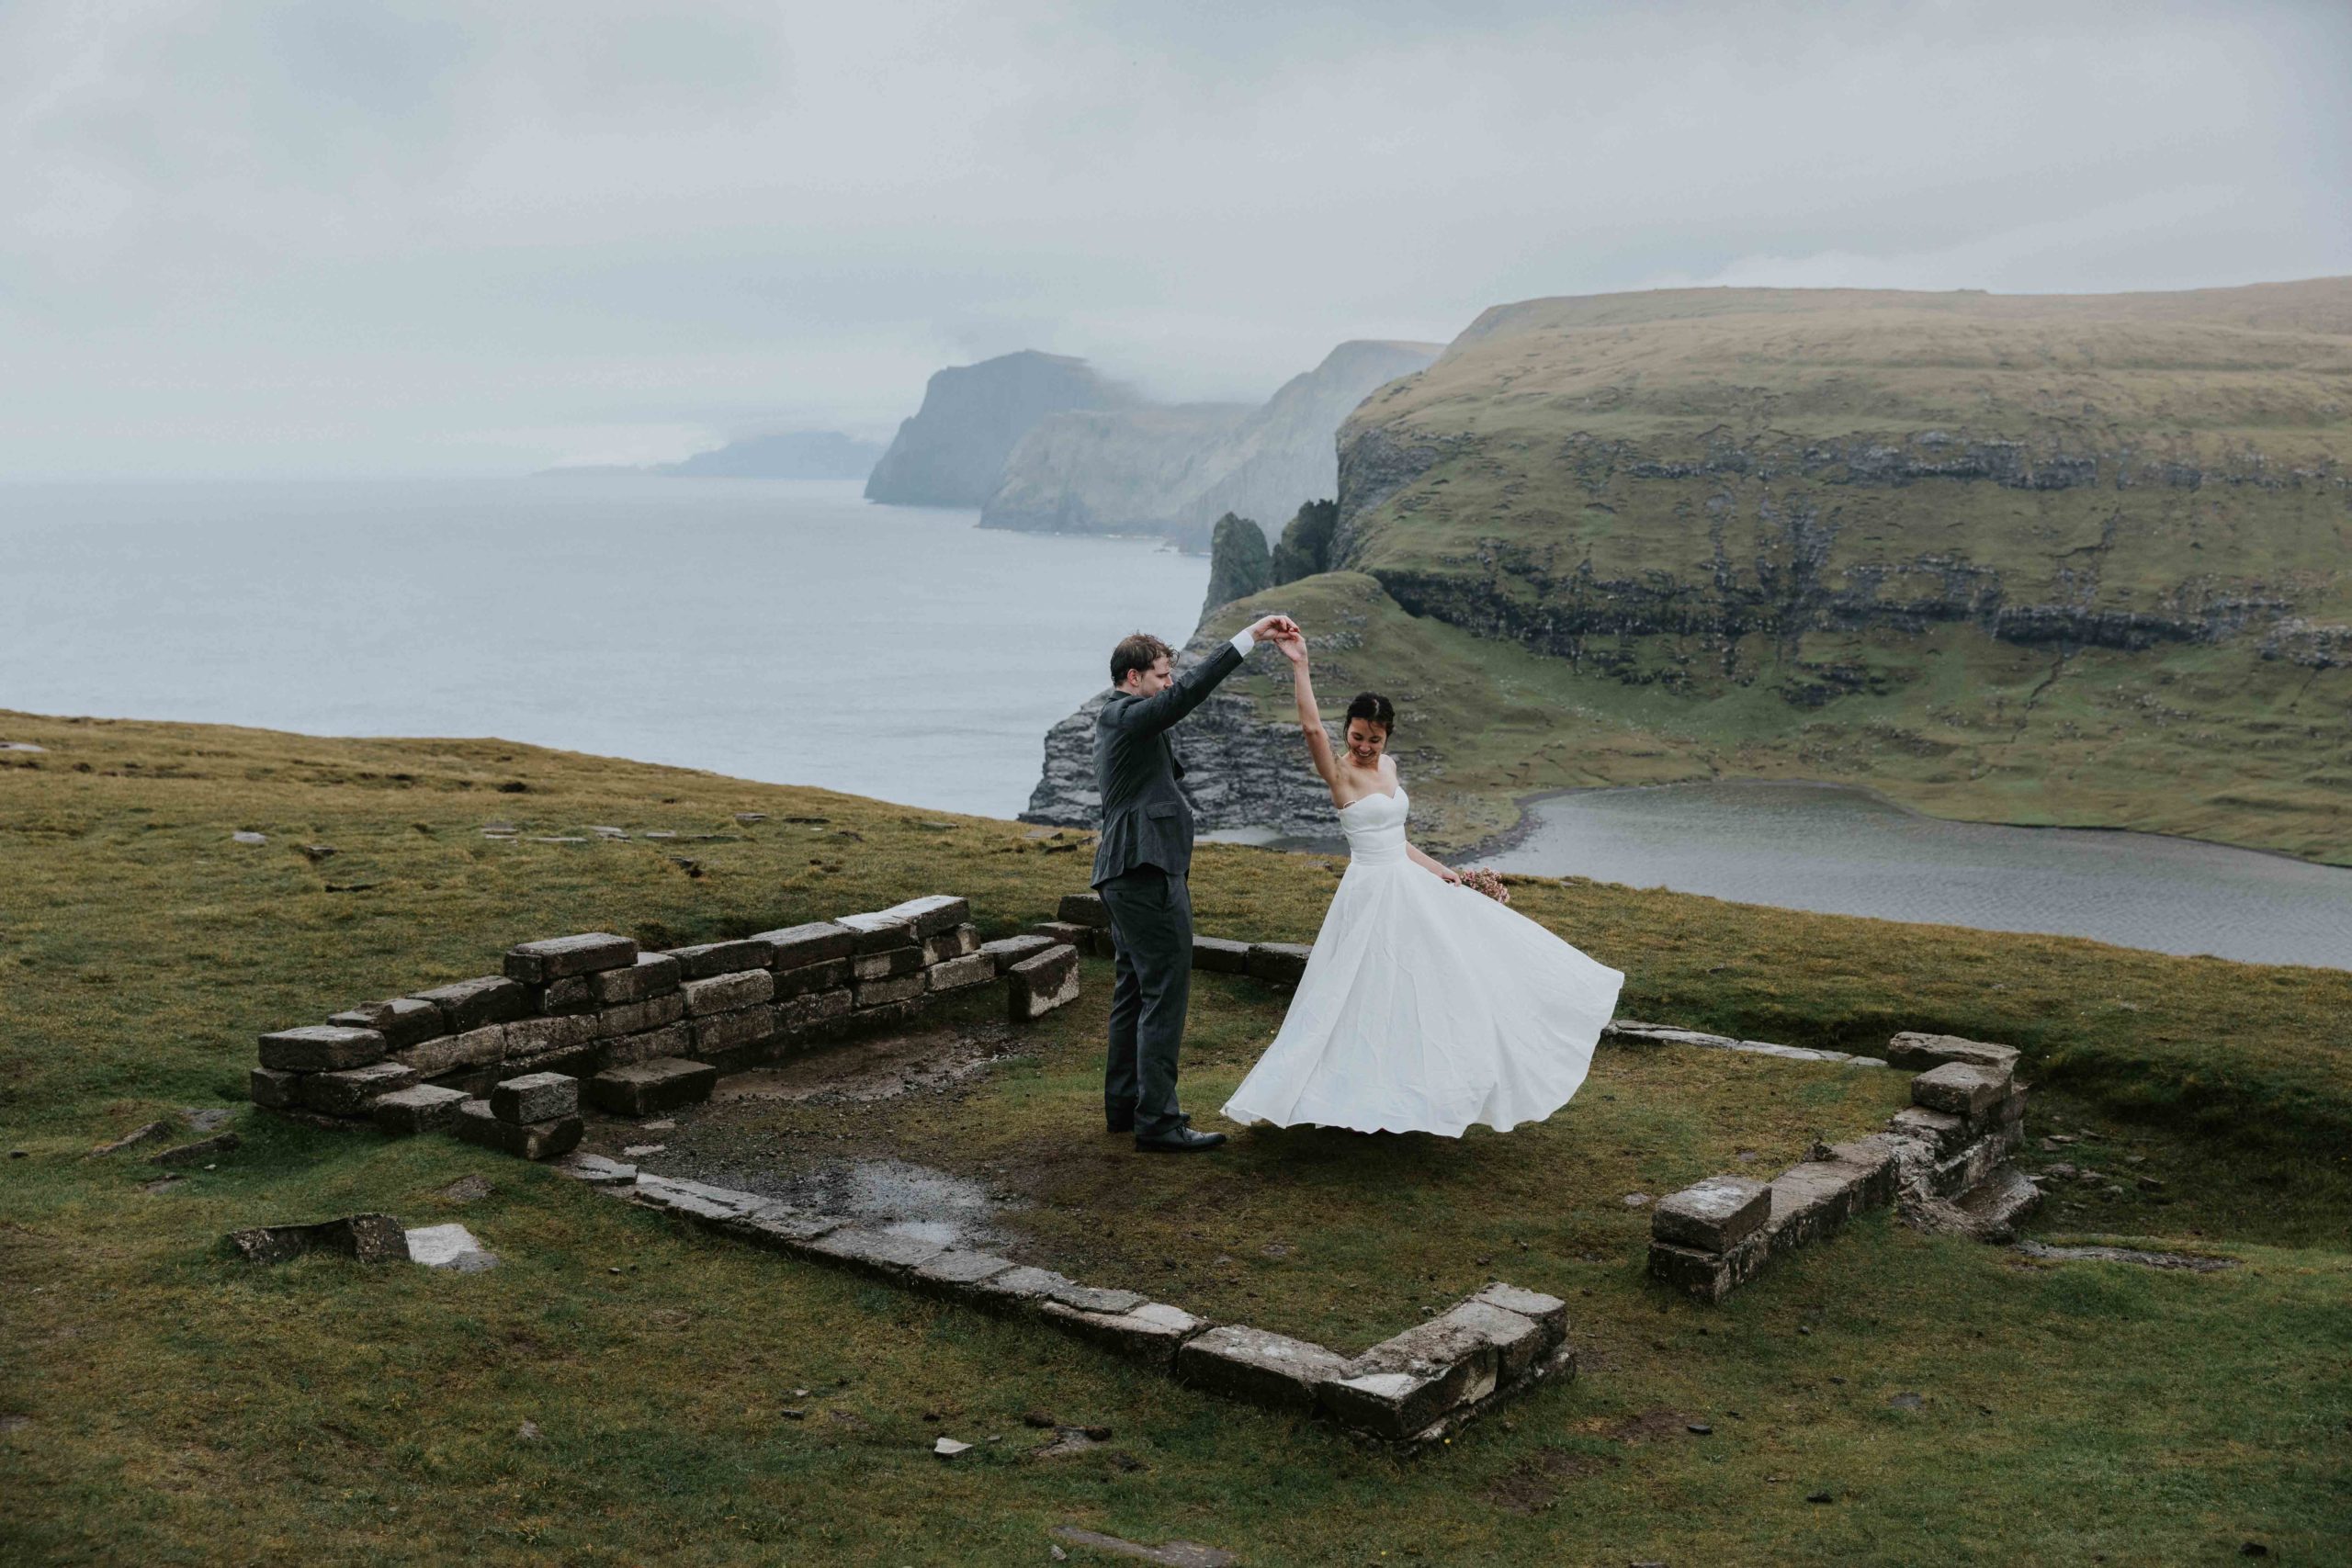 Moody photo of a Faroe islands elopement. There is a couple wearing wedding attire dancing and spinning in old stone ruins with sea cliffs in the background.